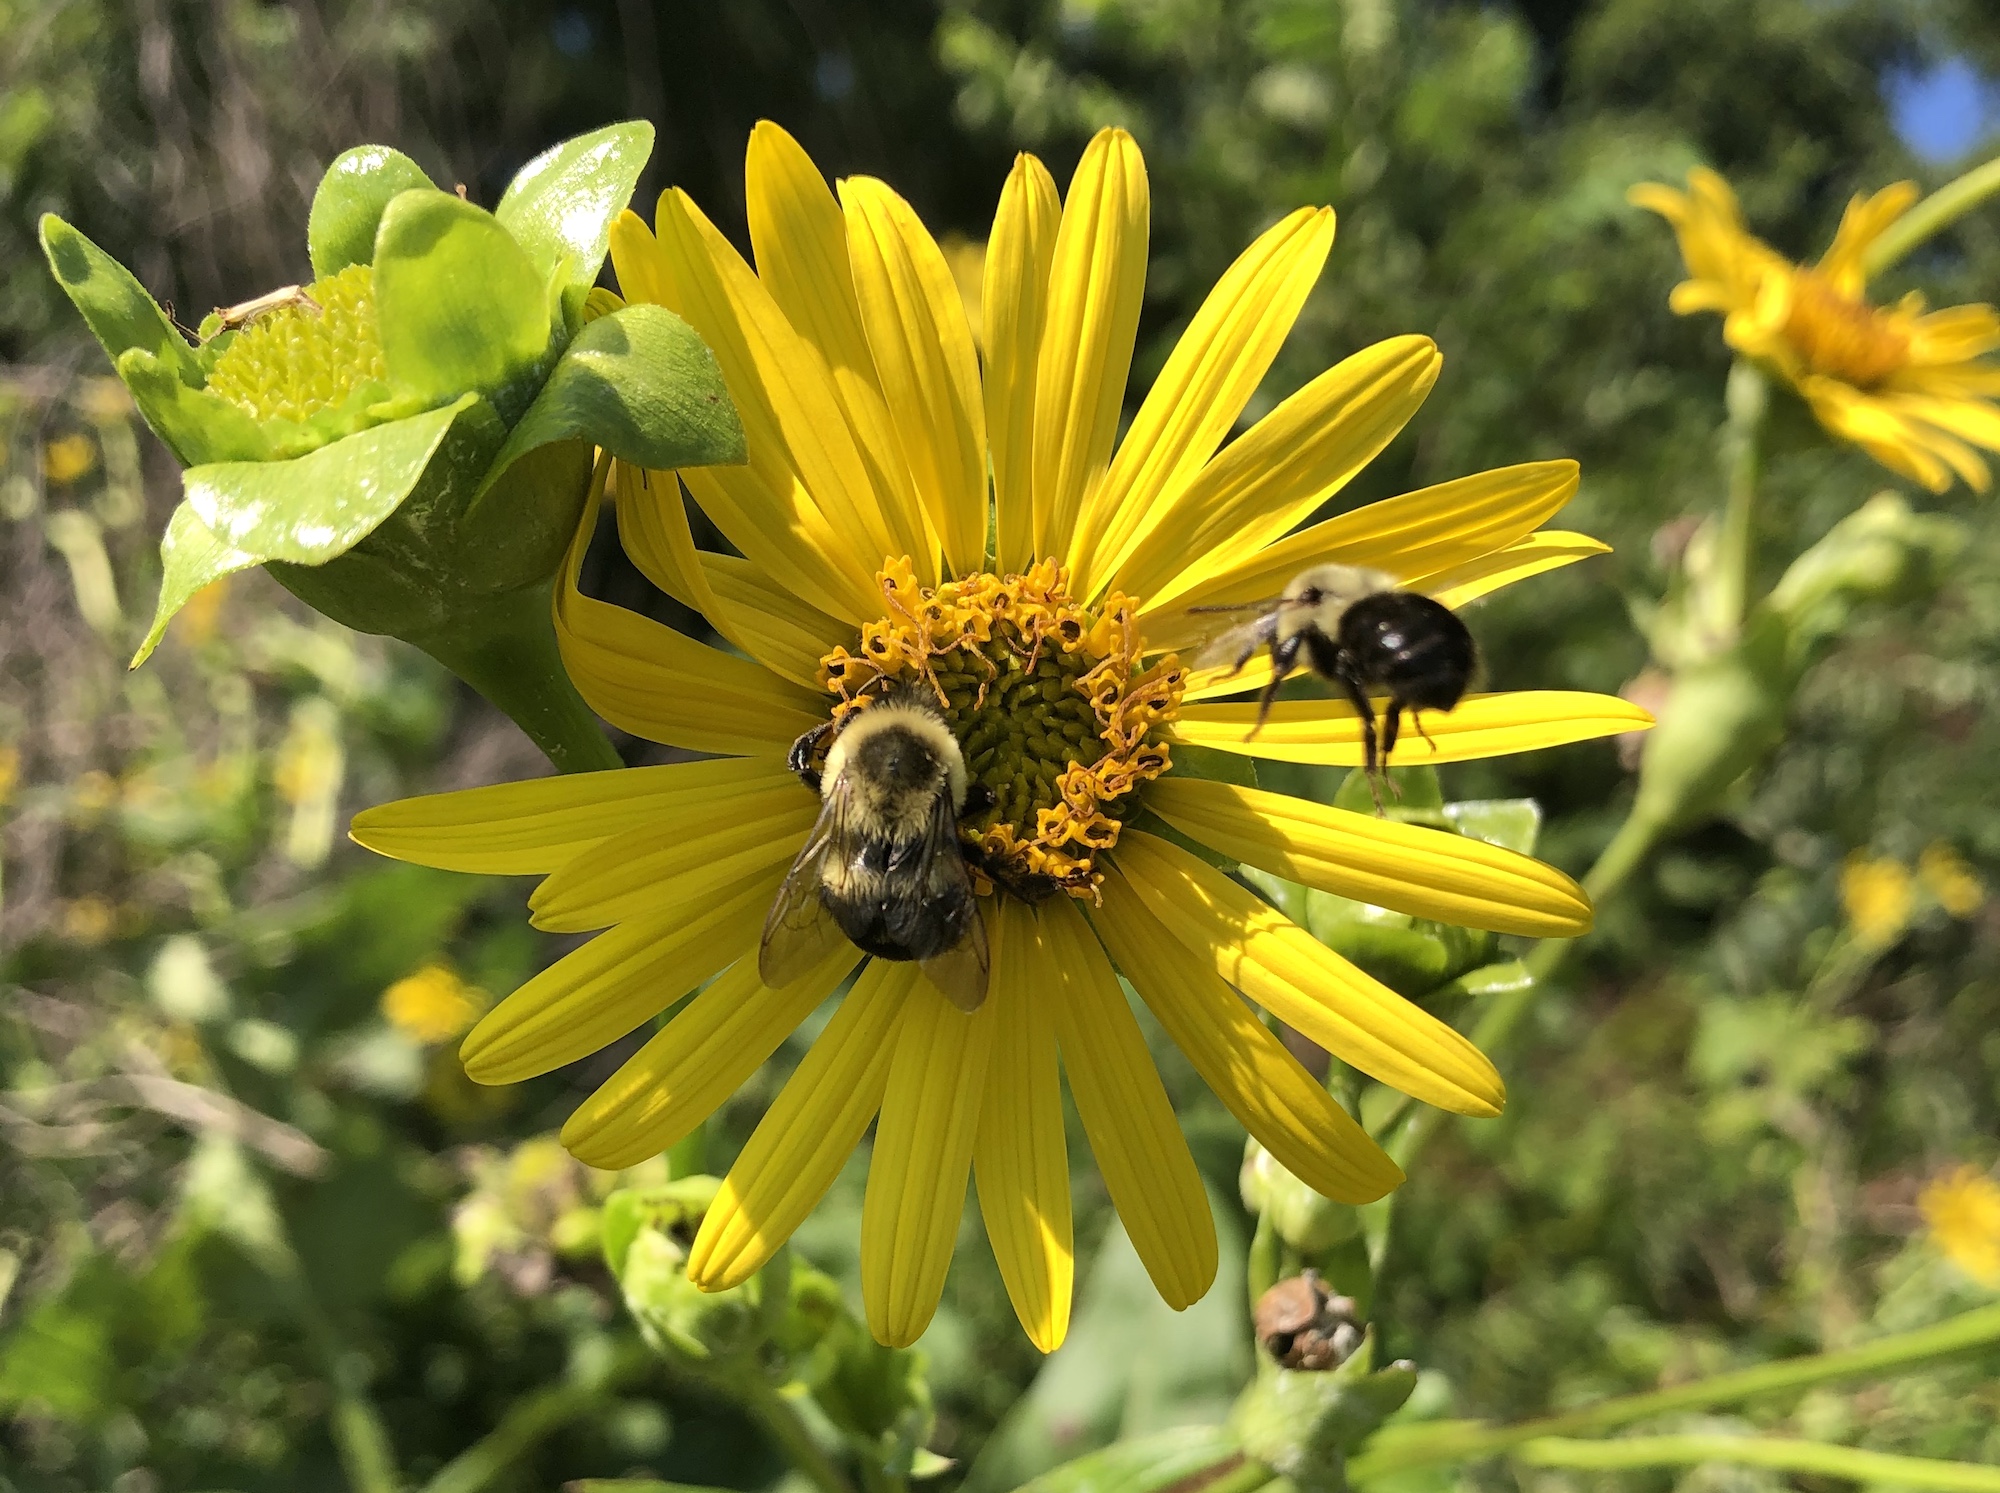 Bumblebees on Cup Plant on August 14, 2020.